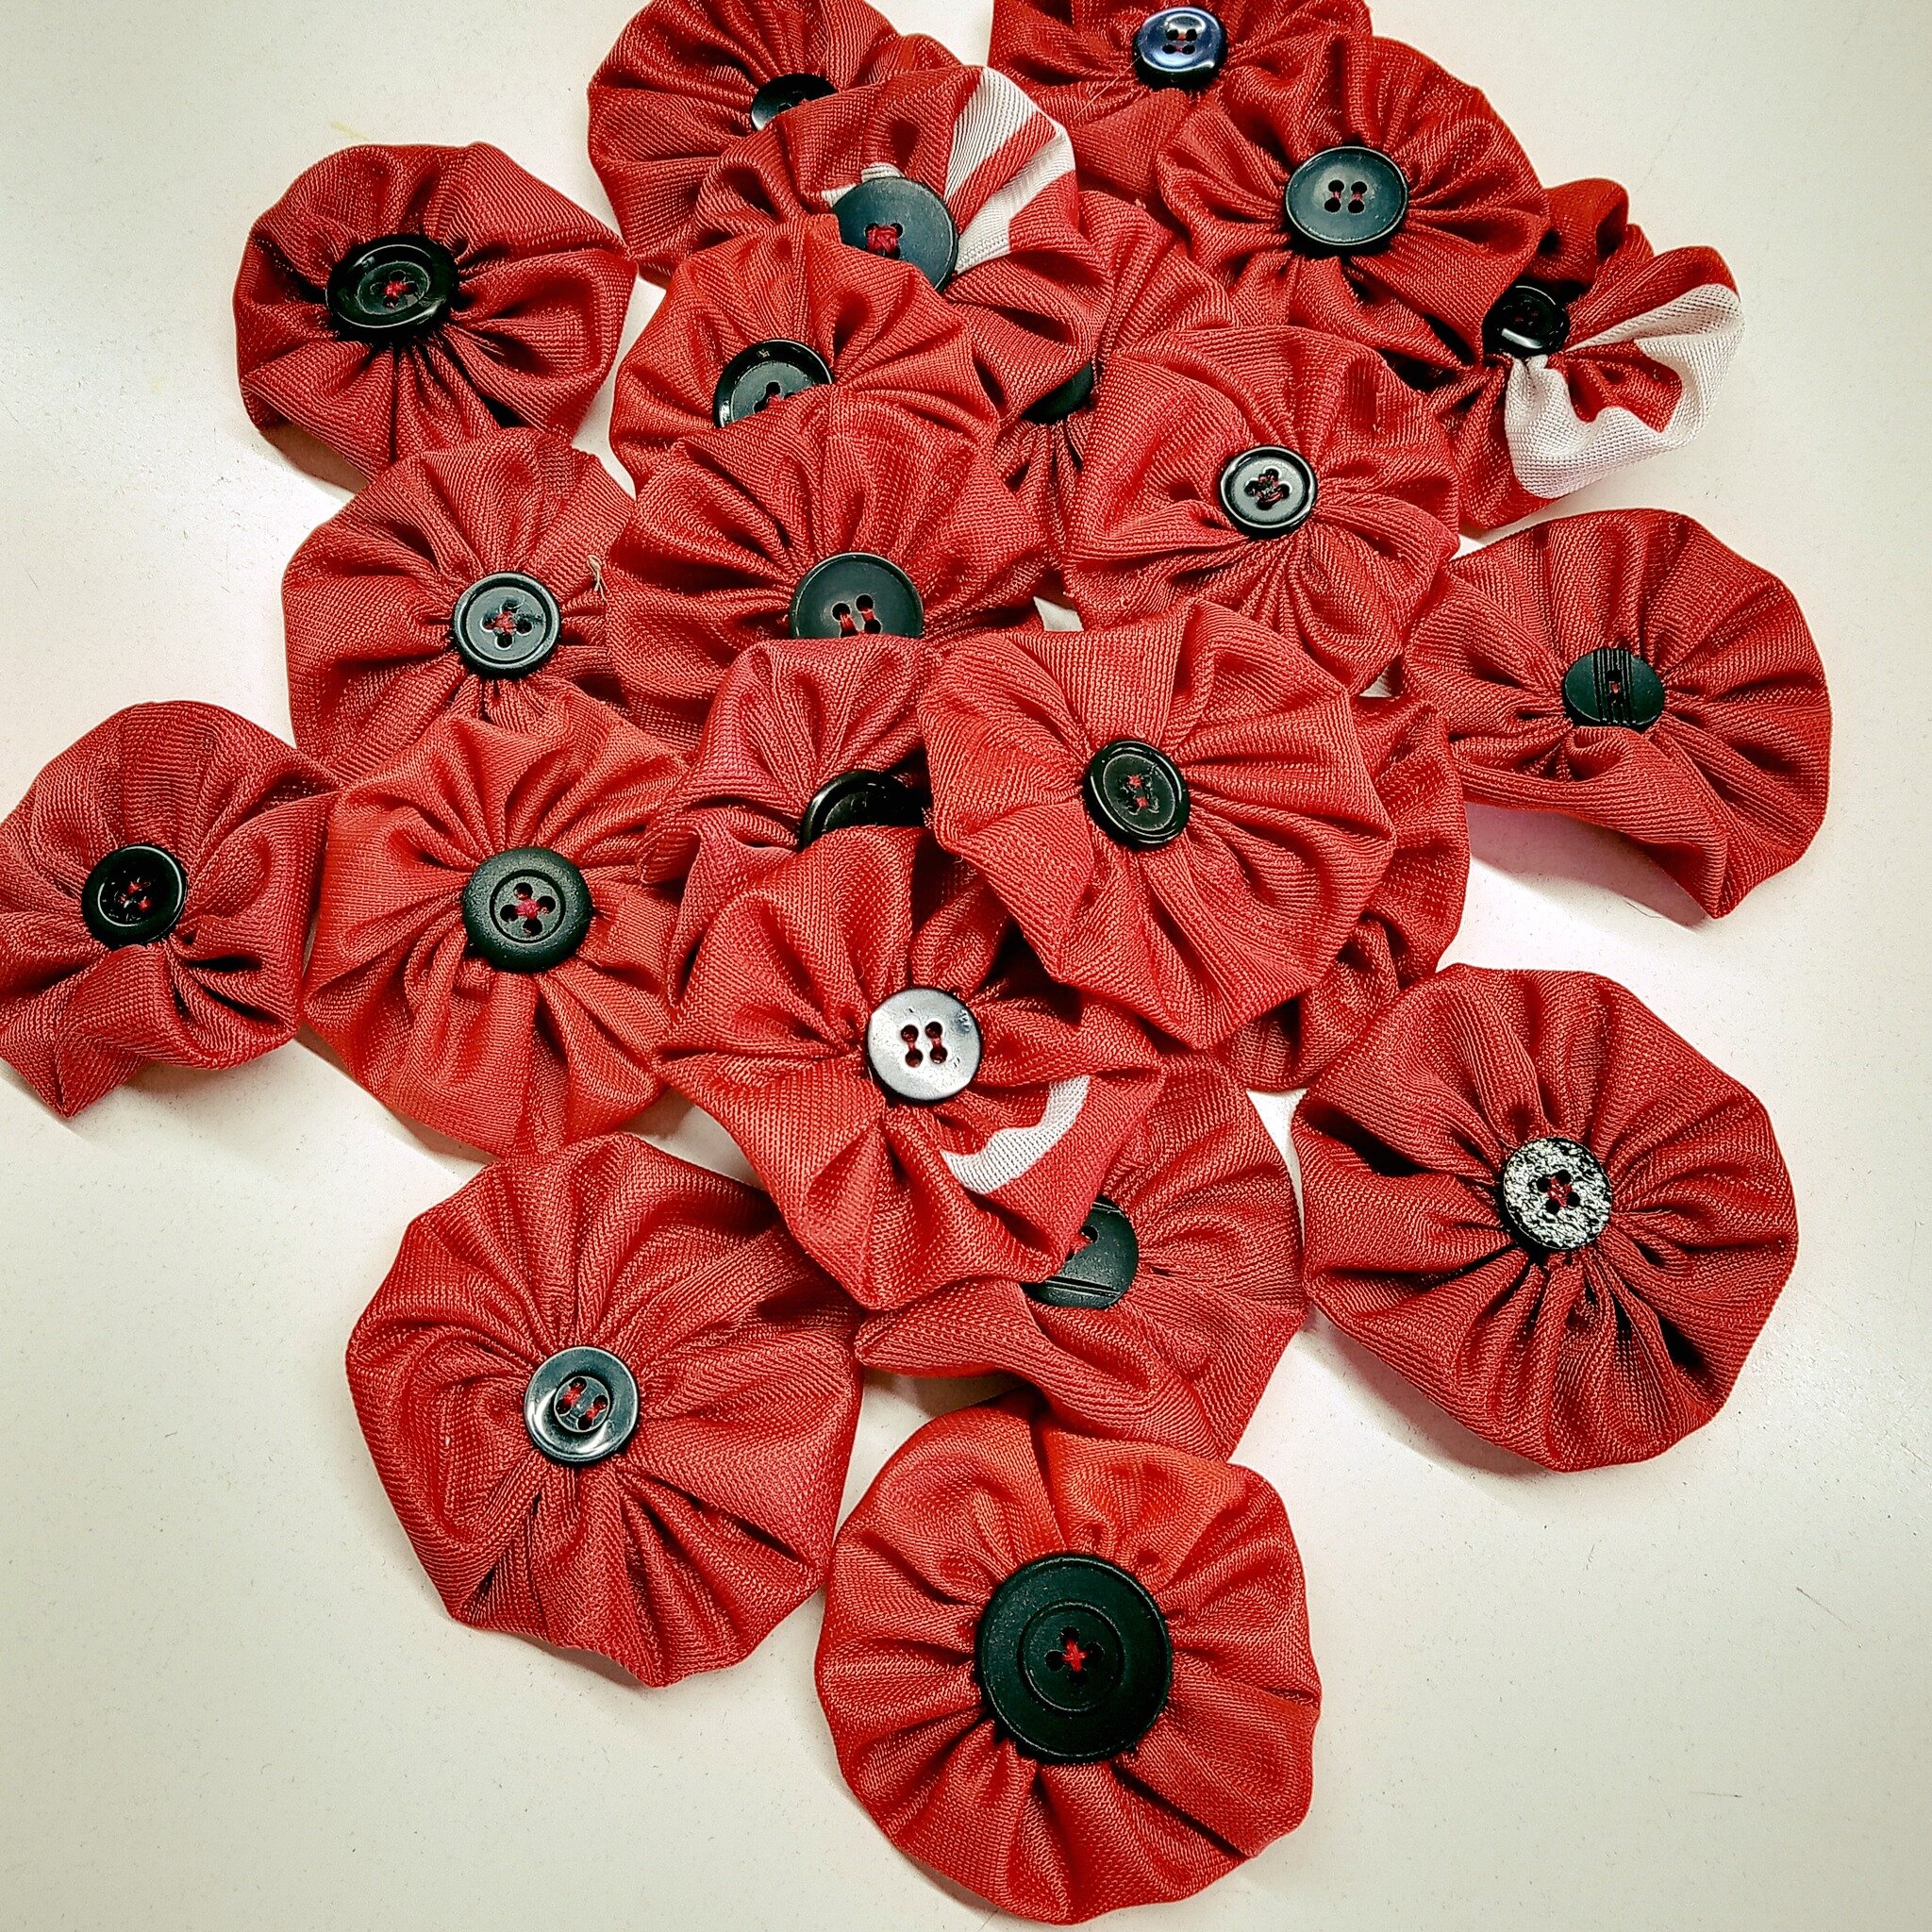 Great time this morning with a bit of a field trip at the @goldencentredunedin  for the first of their poppy making mornings.

The Golden Centre mall are collecting locally made poppies for a commemorative display for ANZAC day next month, and they w